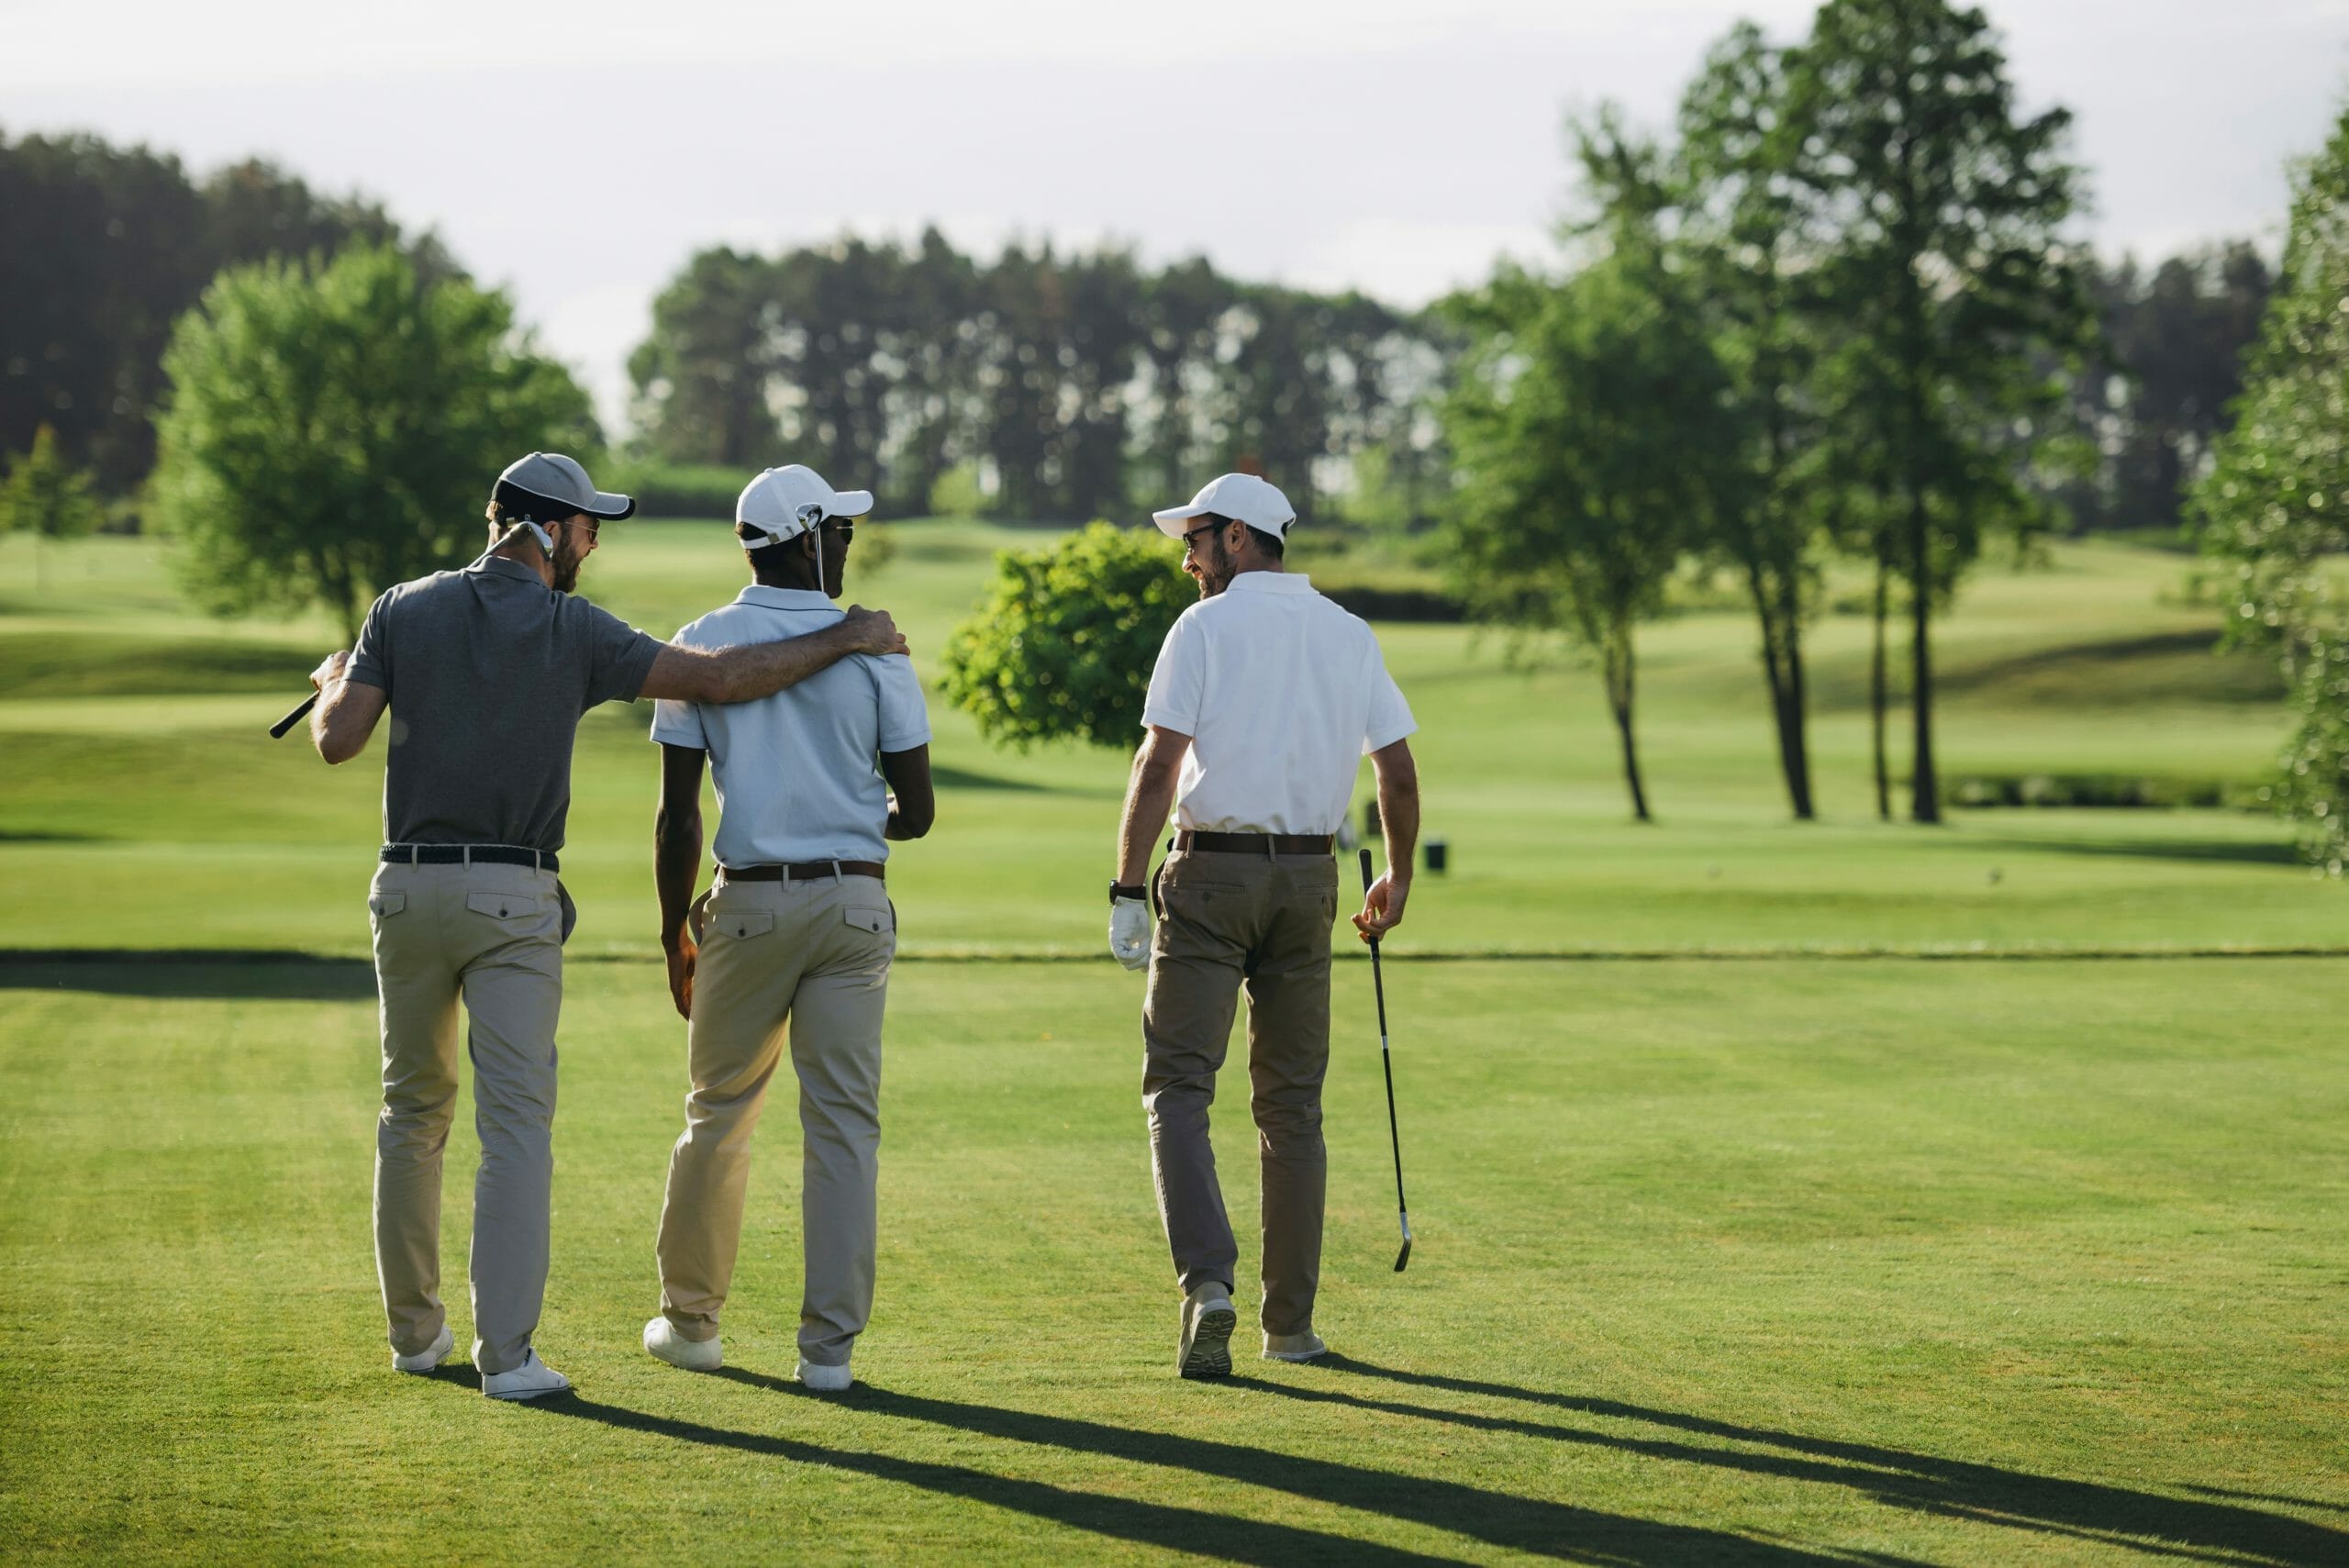 rear view of golfers walking arm over shoulder